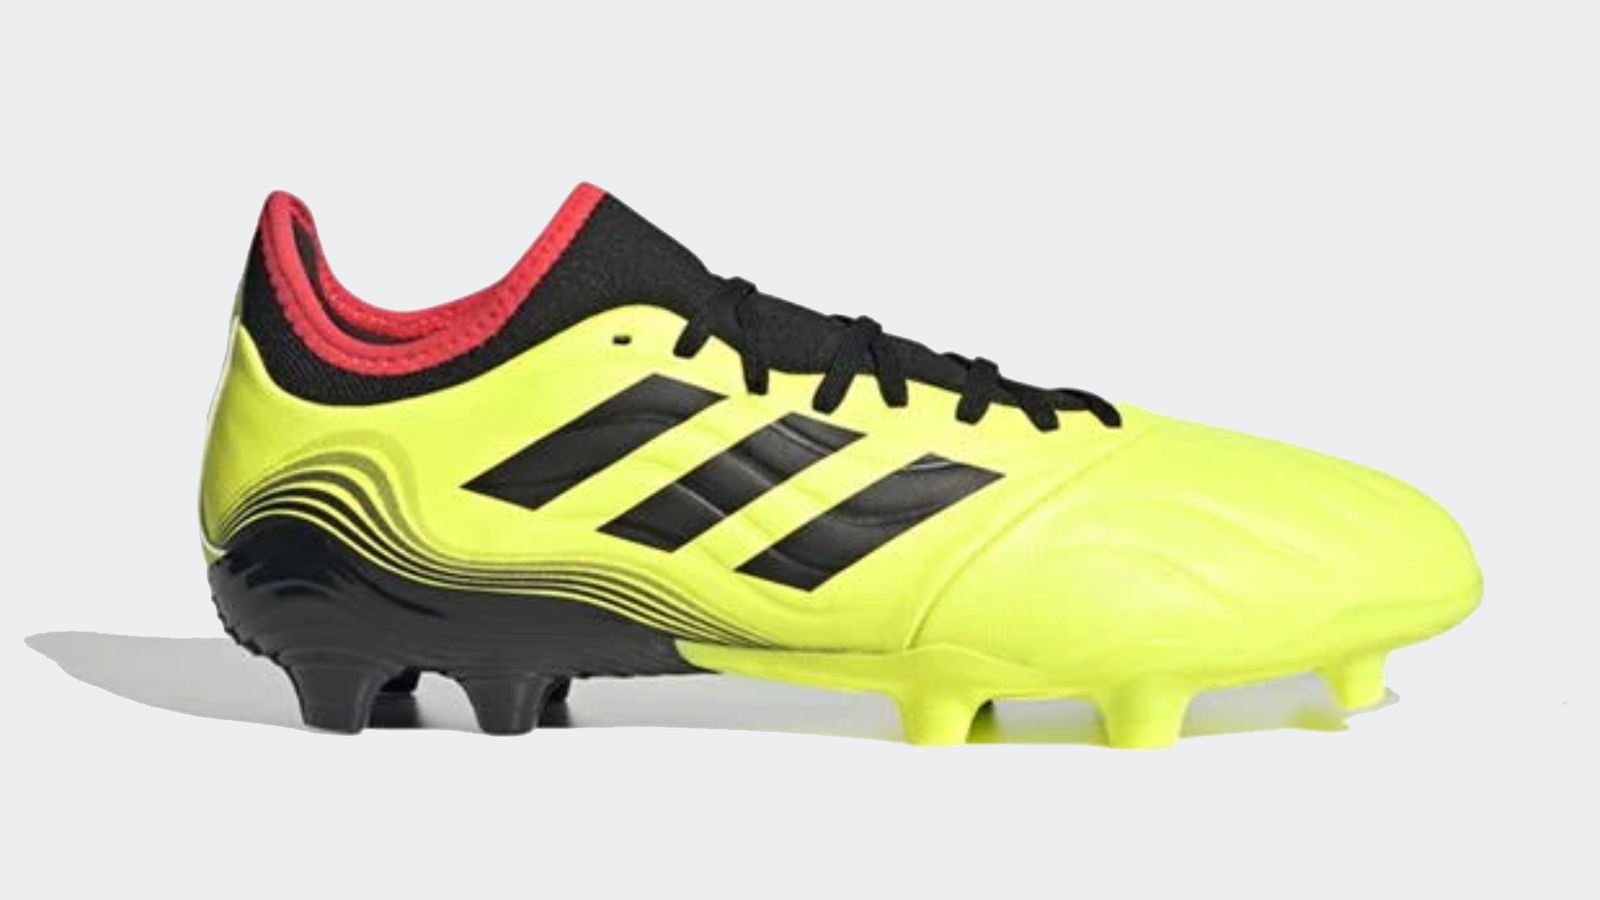 adidas Copa Sense.3 product image of a bright yellow and black boot with red lining.